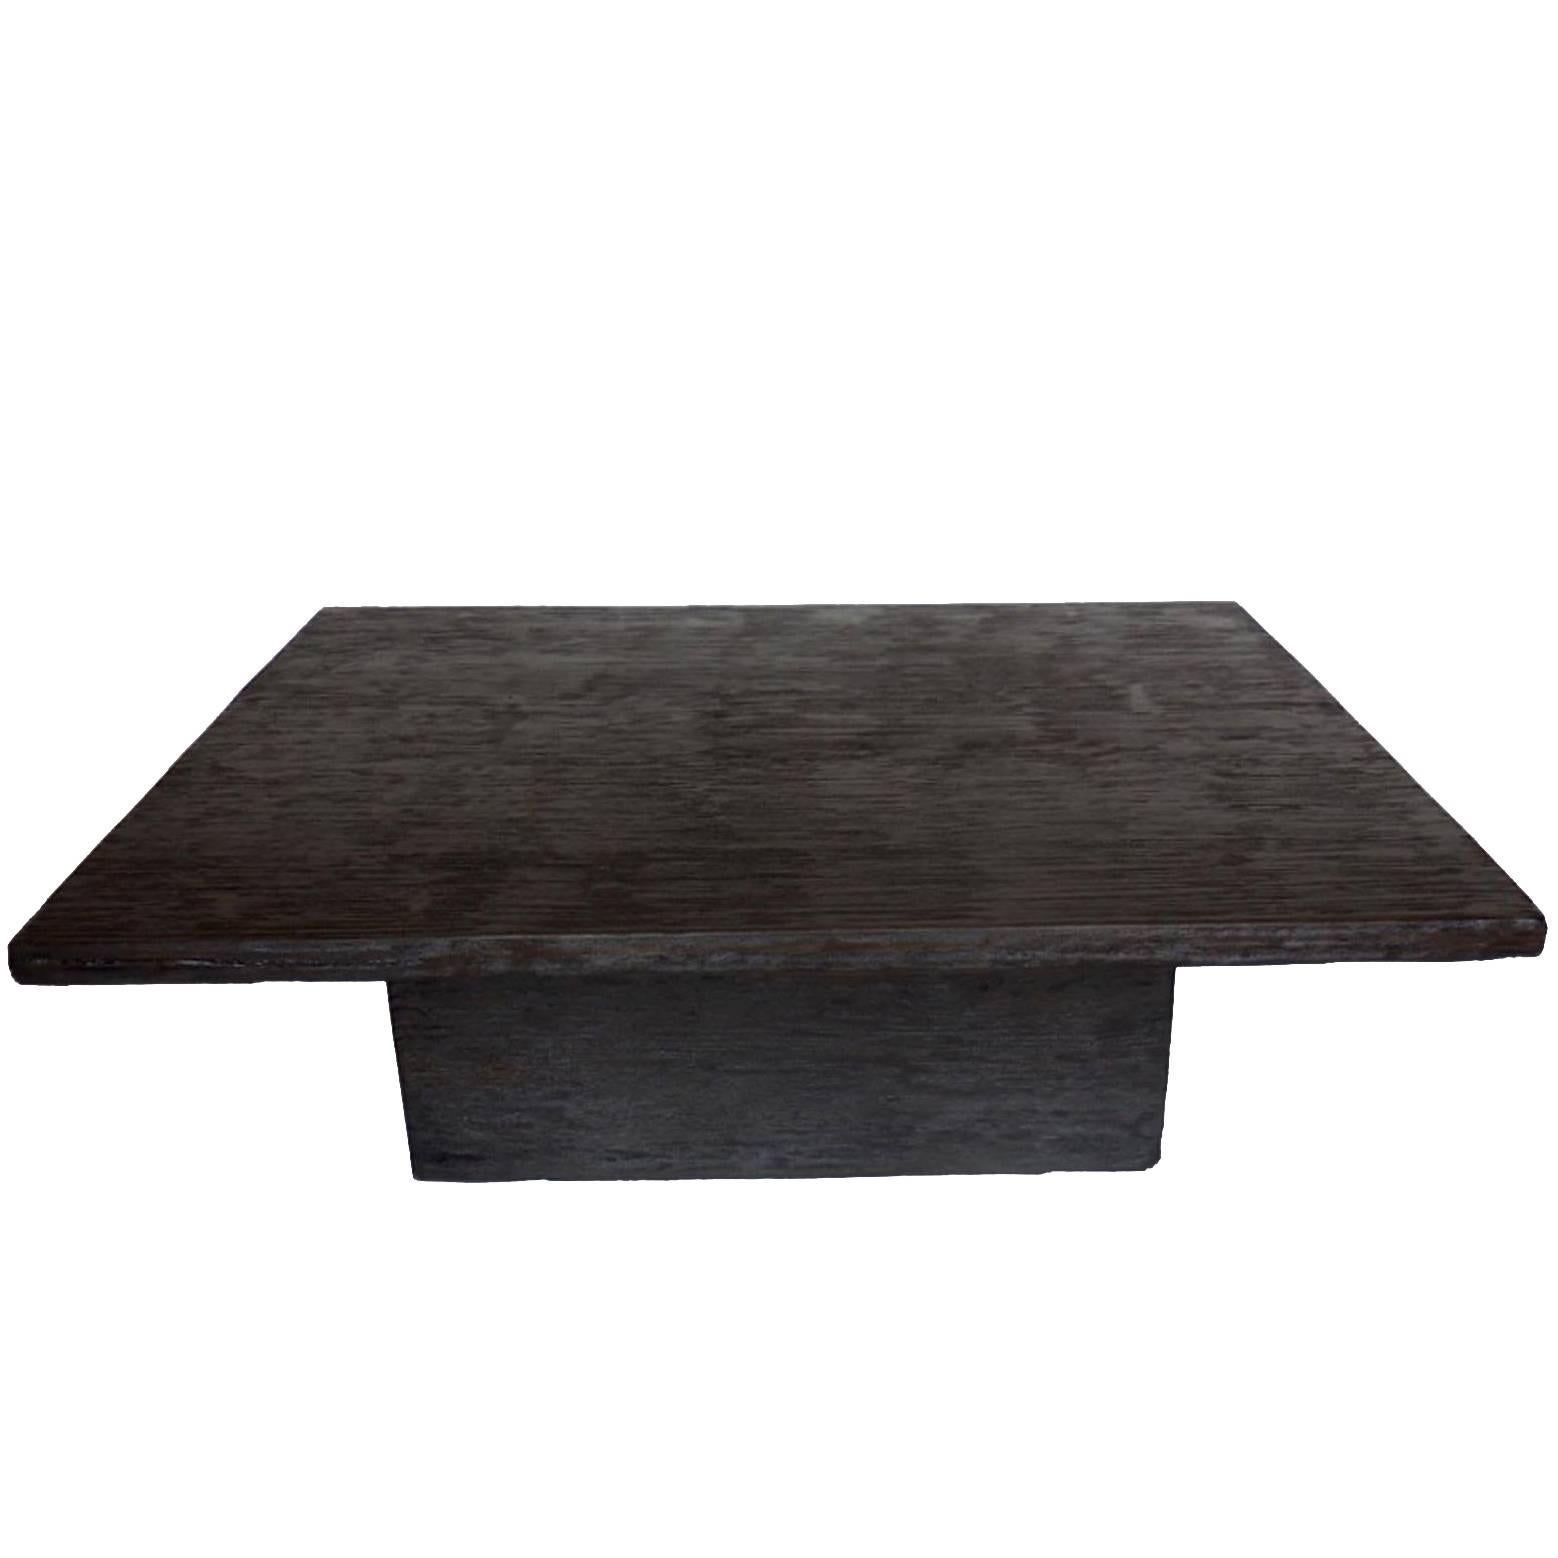 Dos Gallos Custom Wood Cube Coffee Table in Espresso Finish For Sale